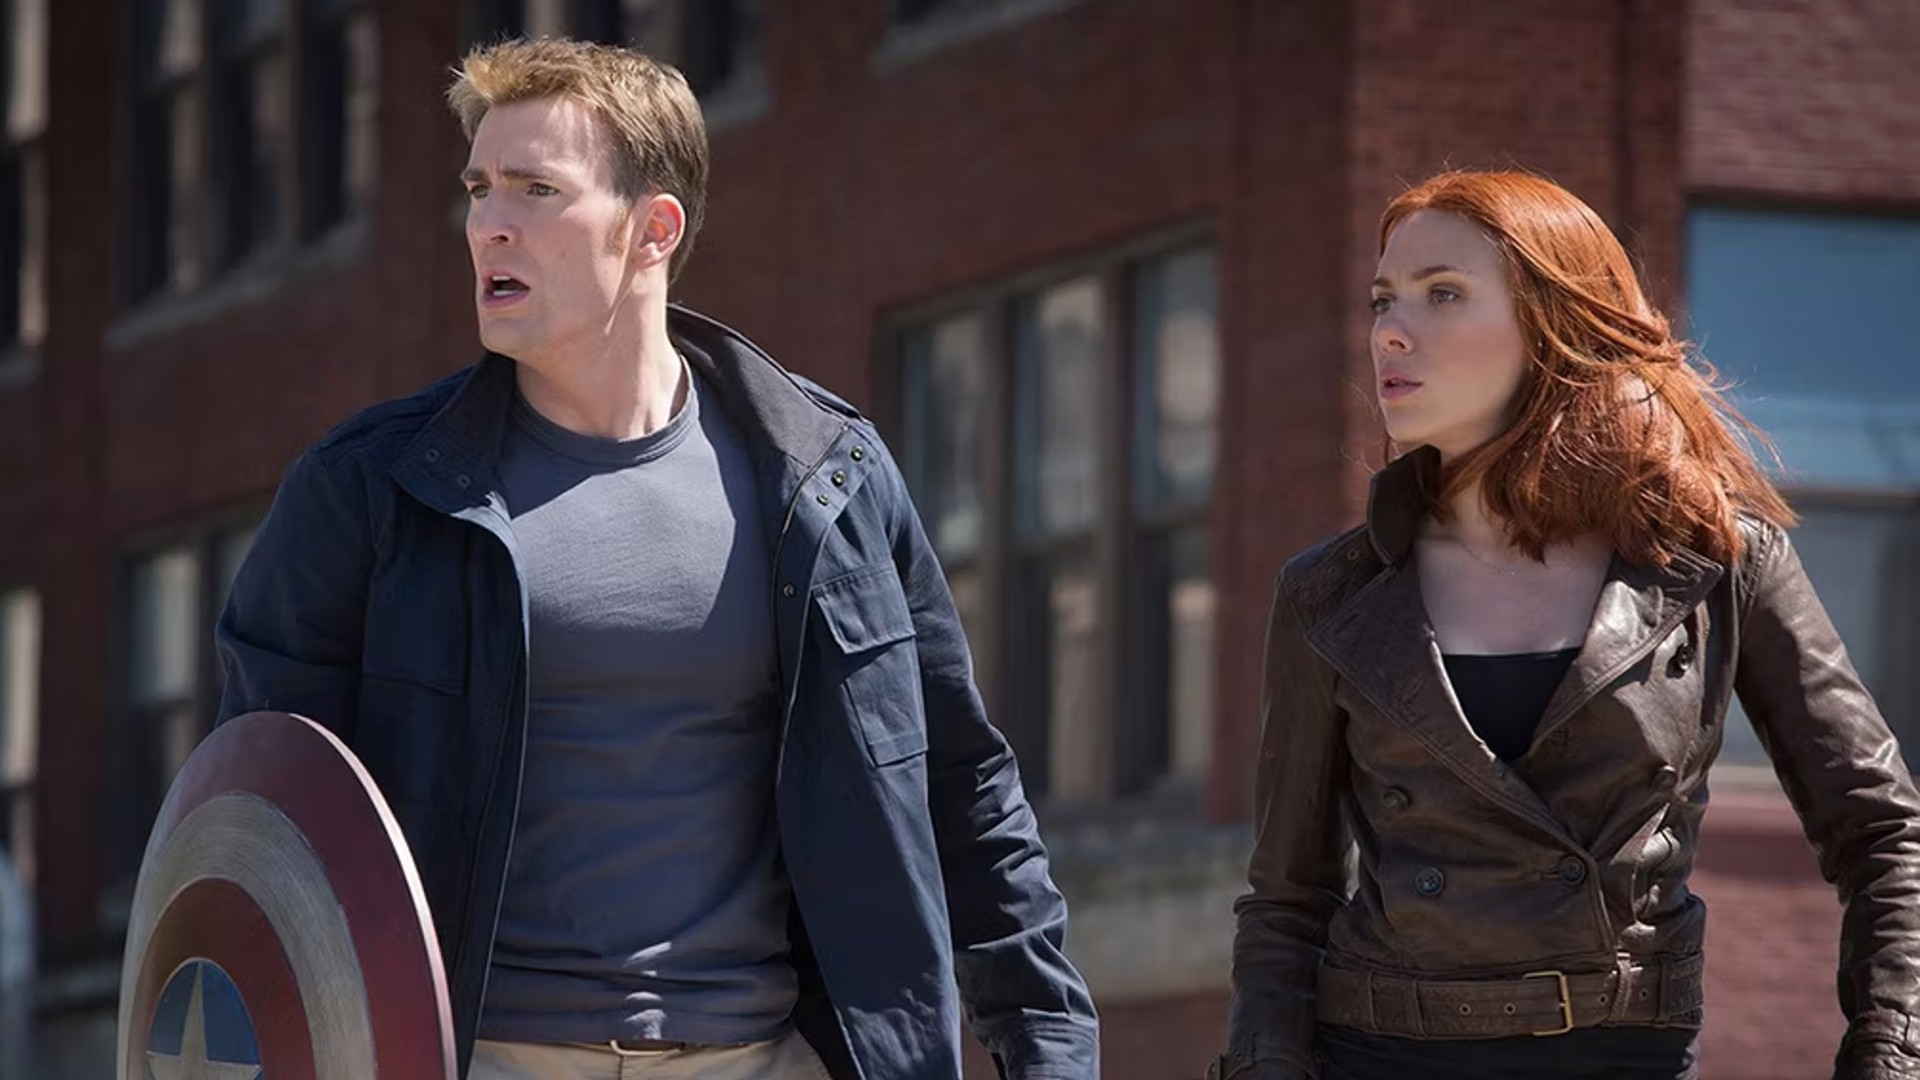 Chris Evans and Scarlett Johansson strike a hero pose in a still from Captain America: The Winter Soldier